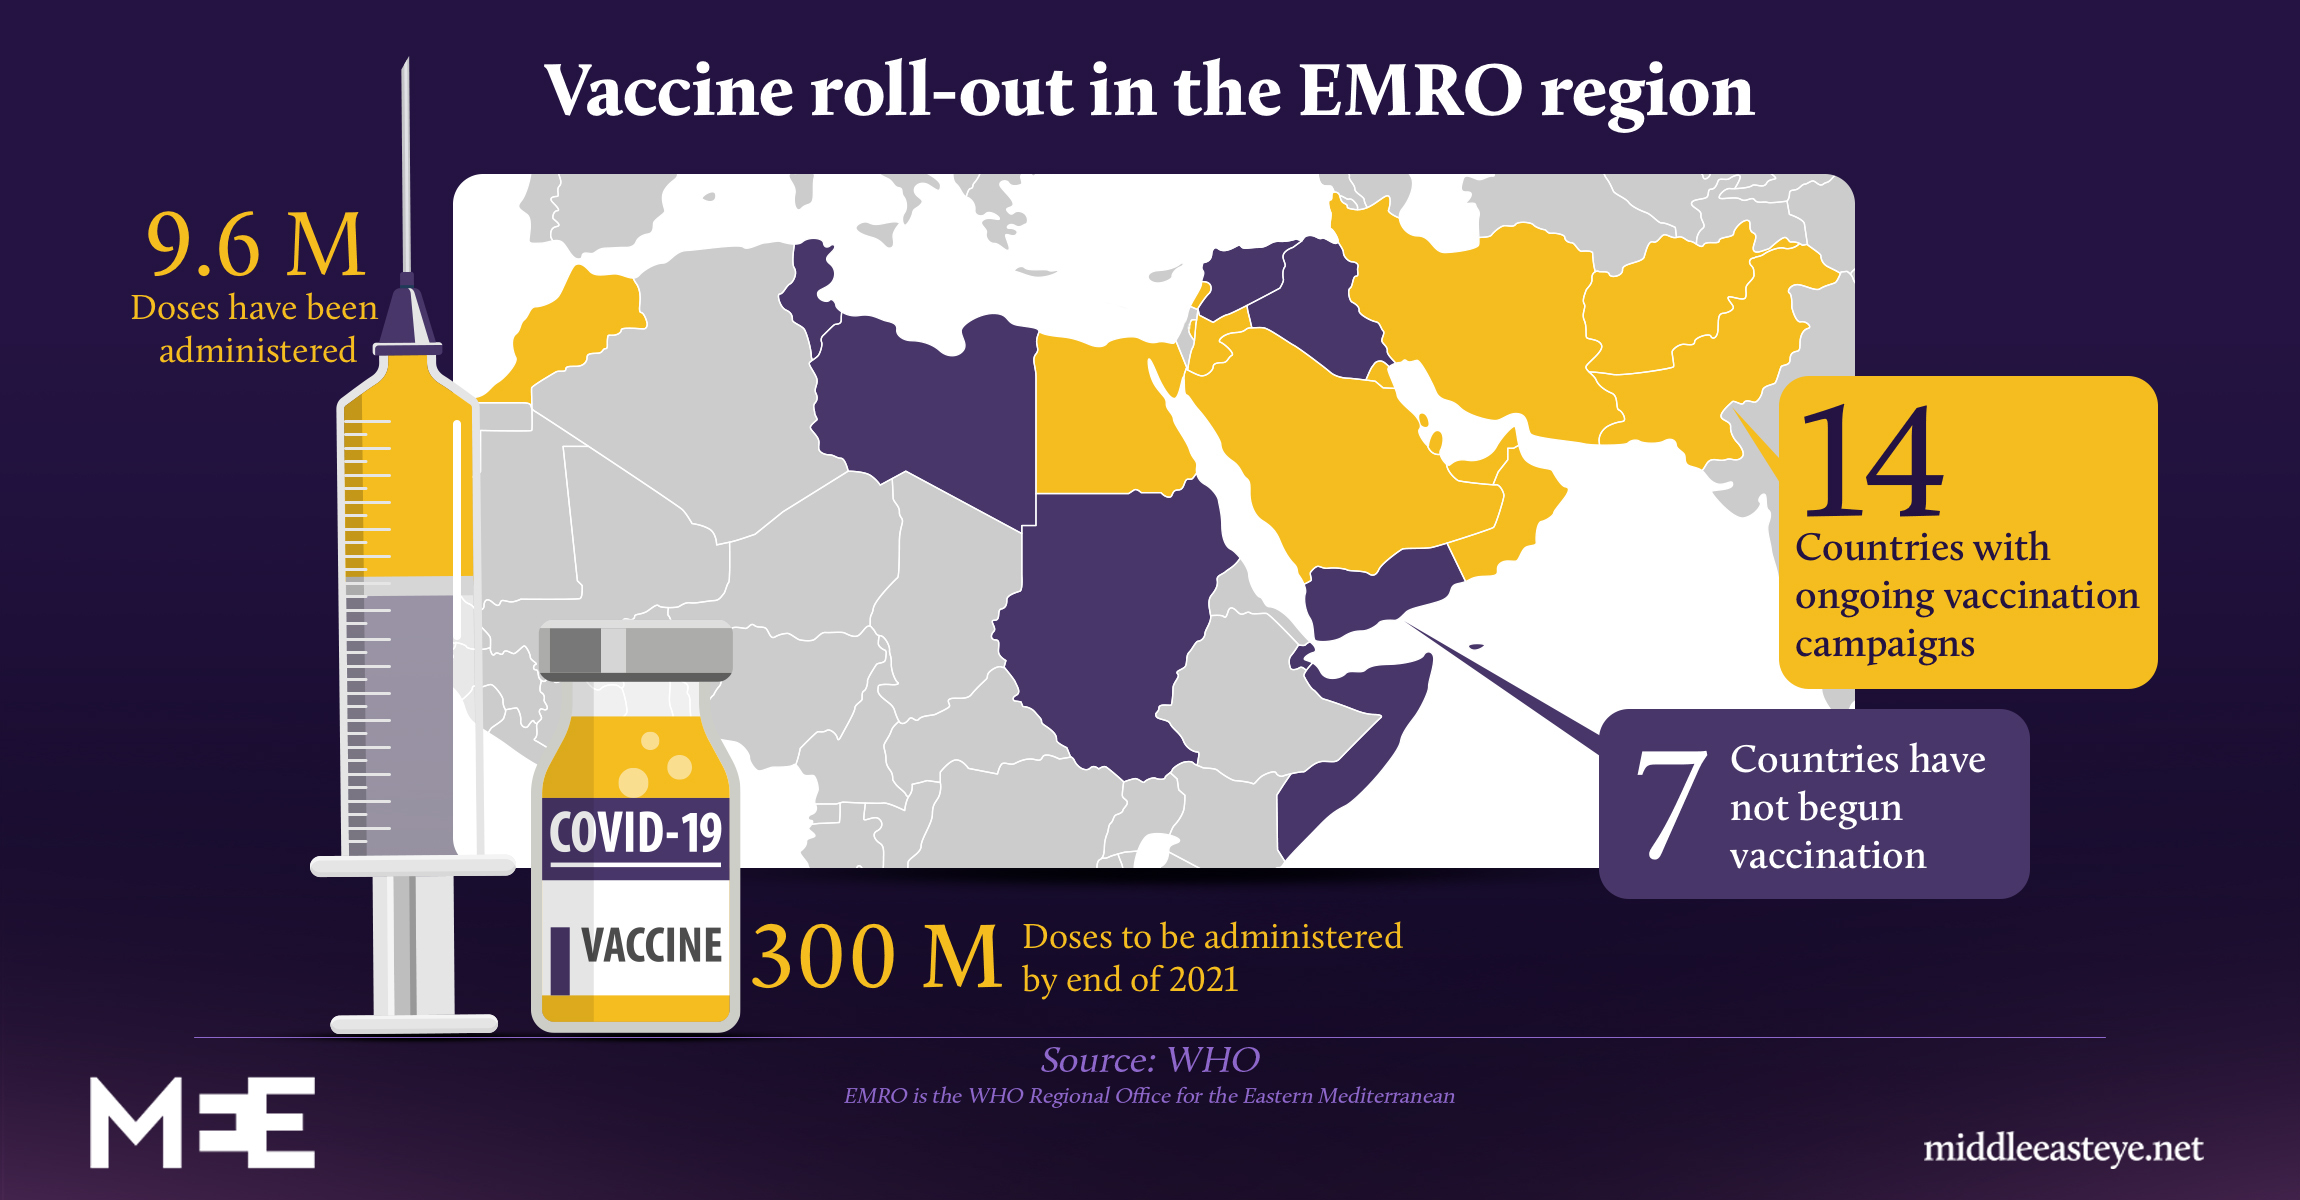 Covid-19 vaccine roll-out in the EMRO region - infographic